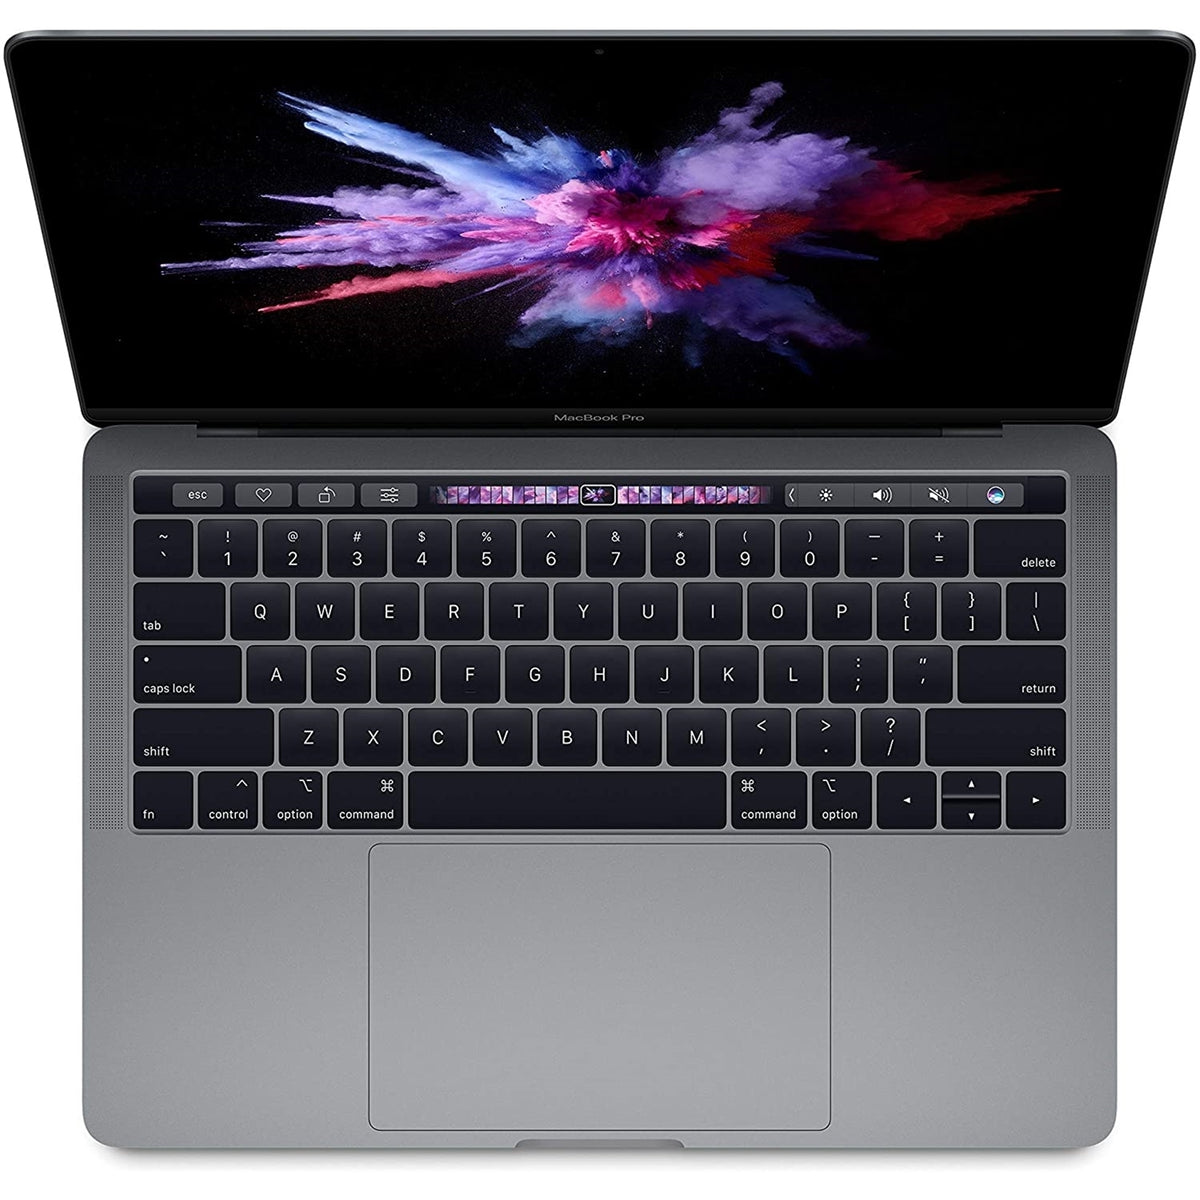 Apple MacBook Pro MUHN2LL/A (2019) 13.3&quot; 8GB 128GB SSD Core™ i5-8257U 1.4GHz macOS, Space Gray (Certified Refurbished)